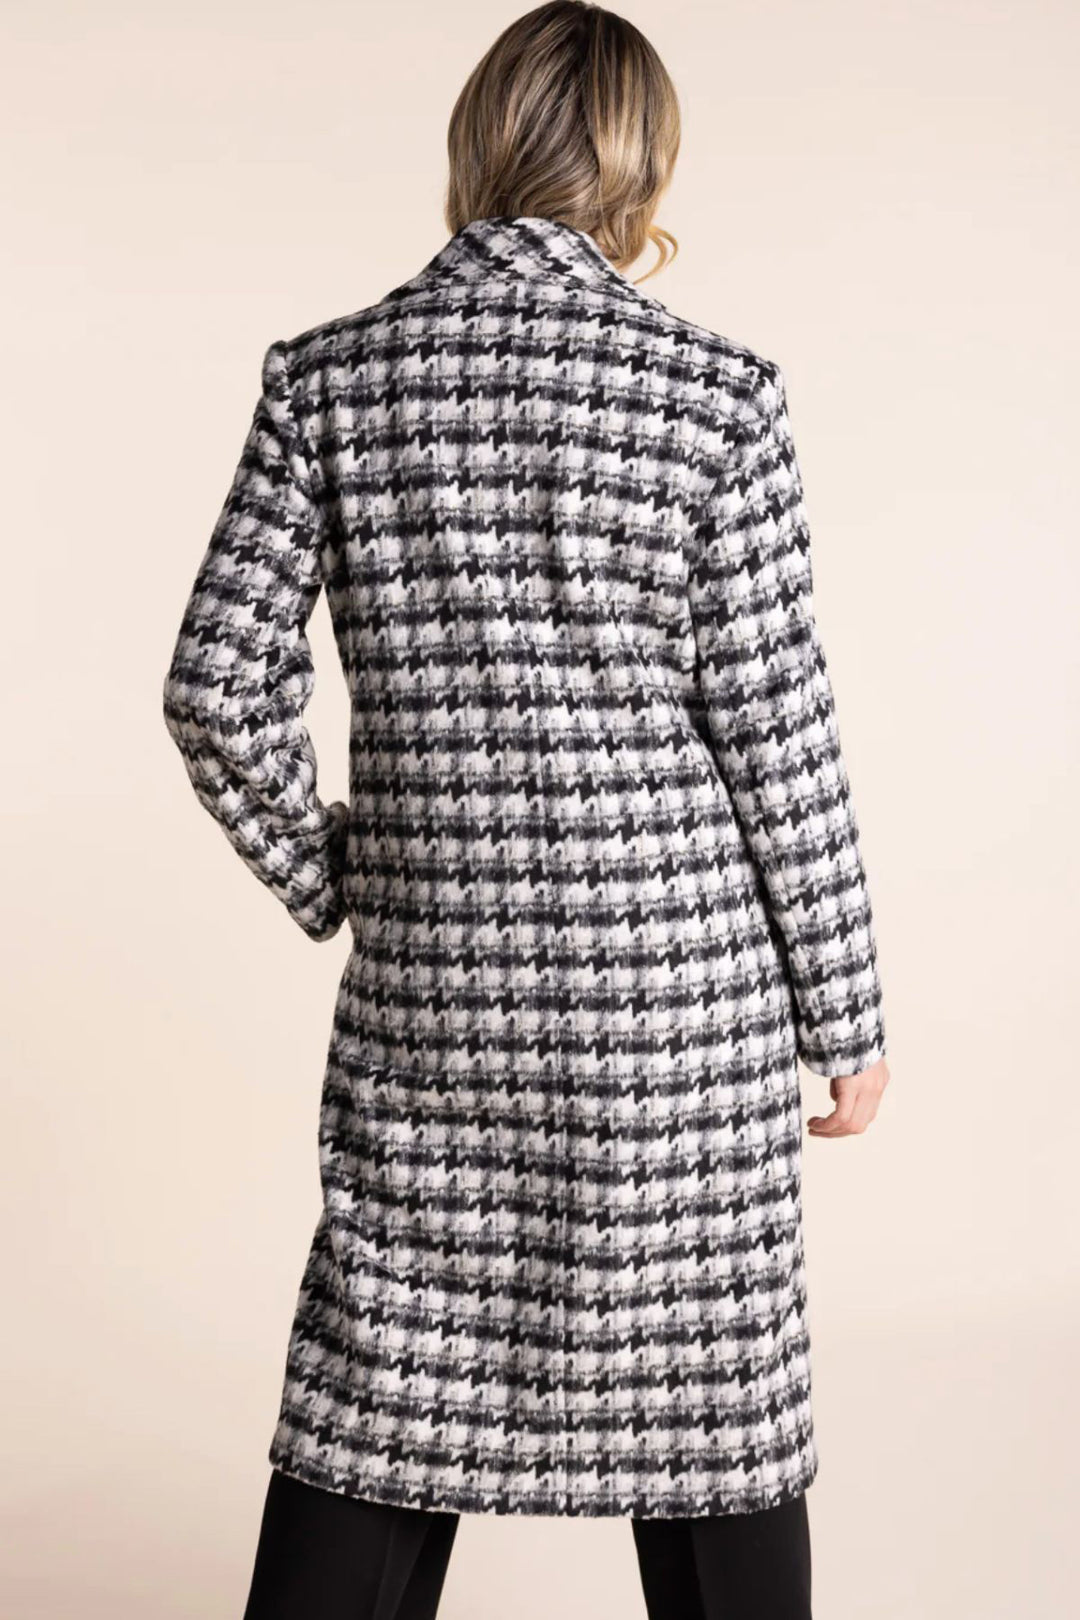 Brand : Two T's Long Check Coat Style Code : 2550 Colour : White/Black check Fabric : Main 95% Polyester 5% Wool,  Lining 97% Polyester 3% Elastane Double Breasted Lined Below the knee length Pockets